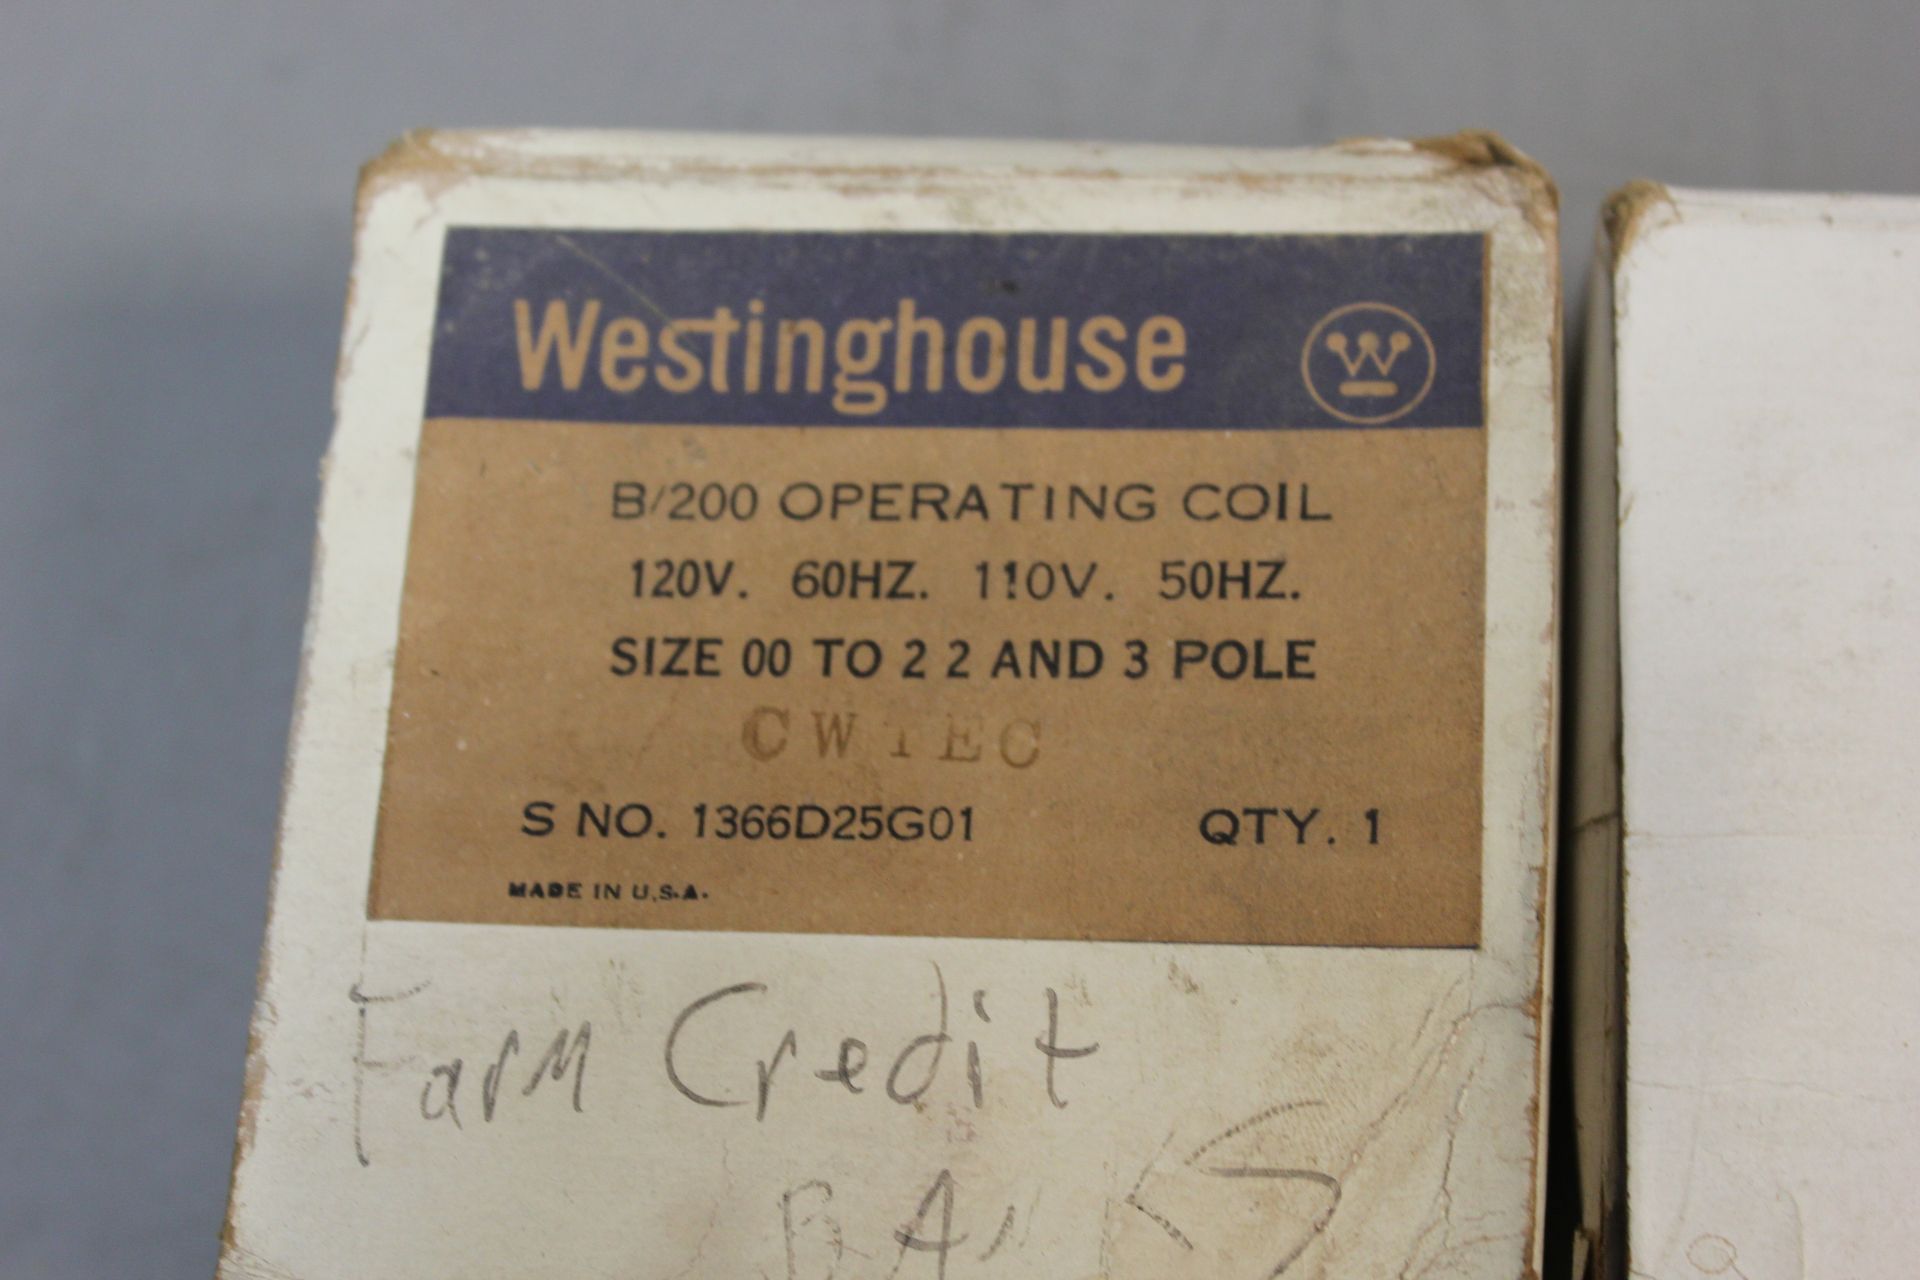 2 NEW WESTINGHOUSE B/200 OPERATING COILS - Image 2 of 4